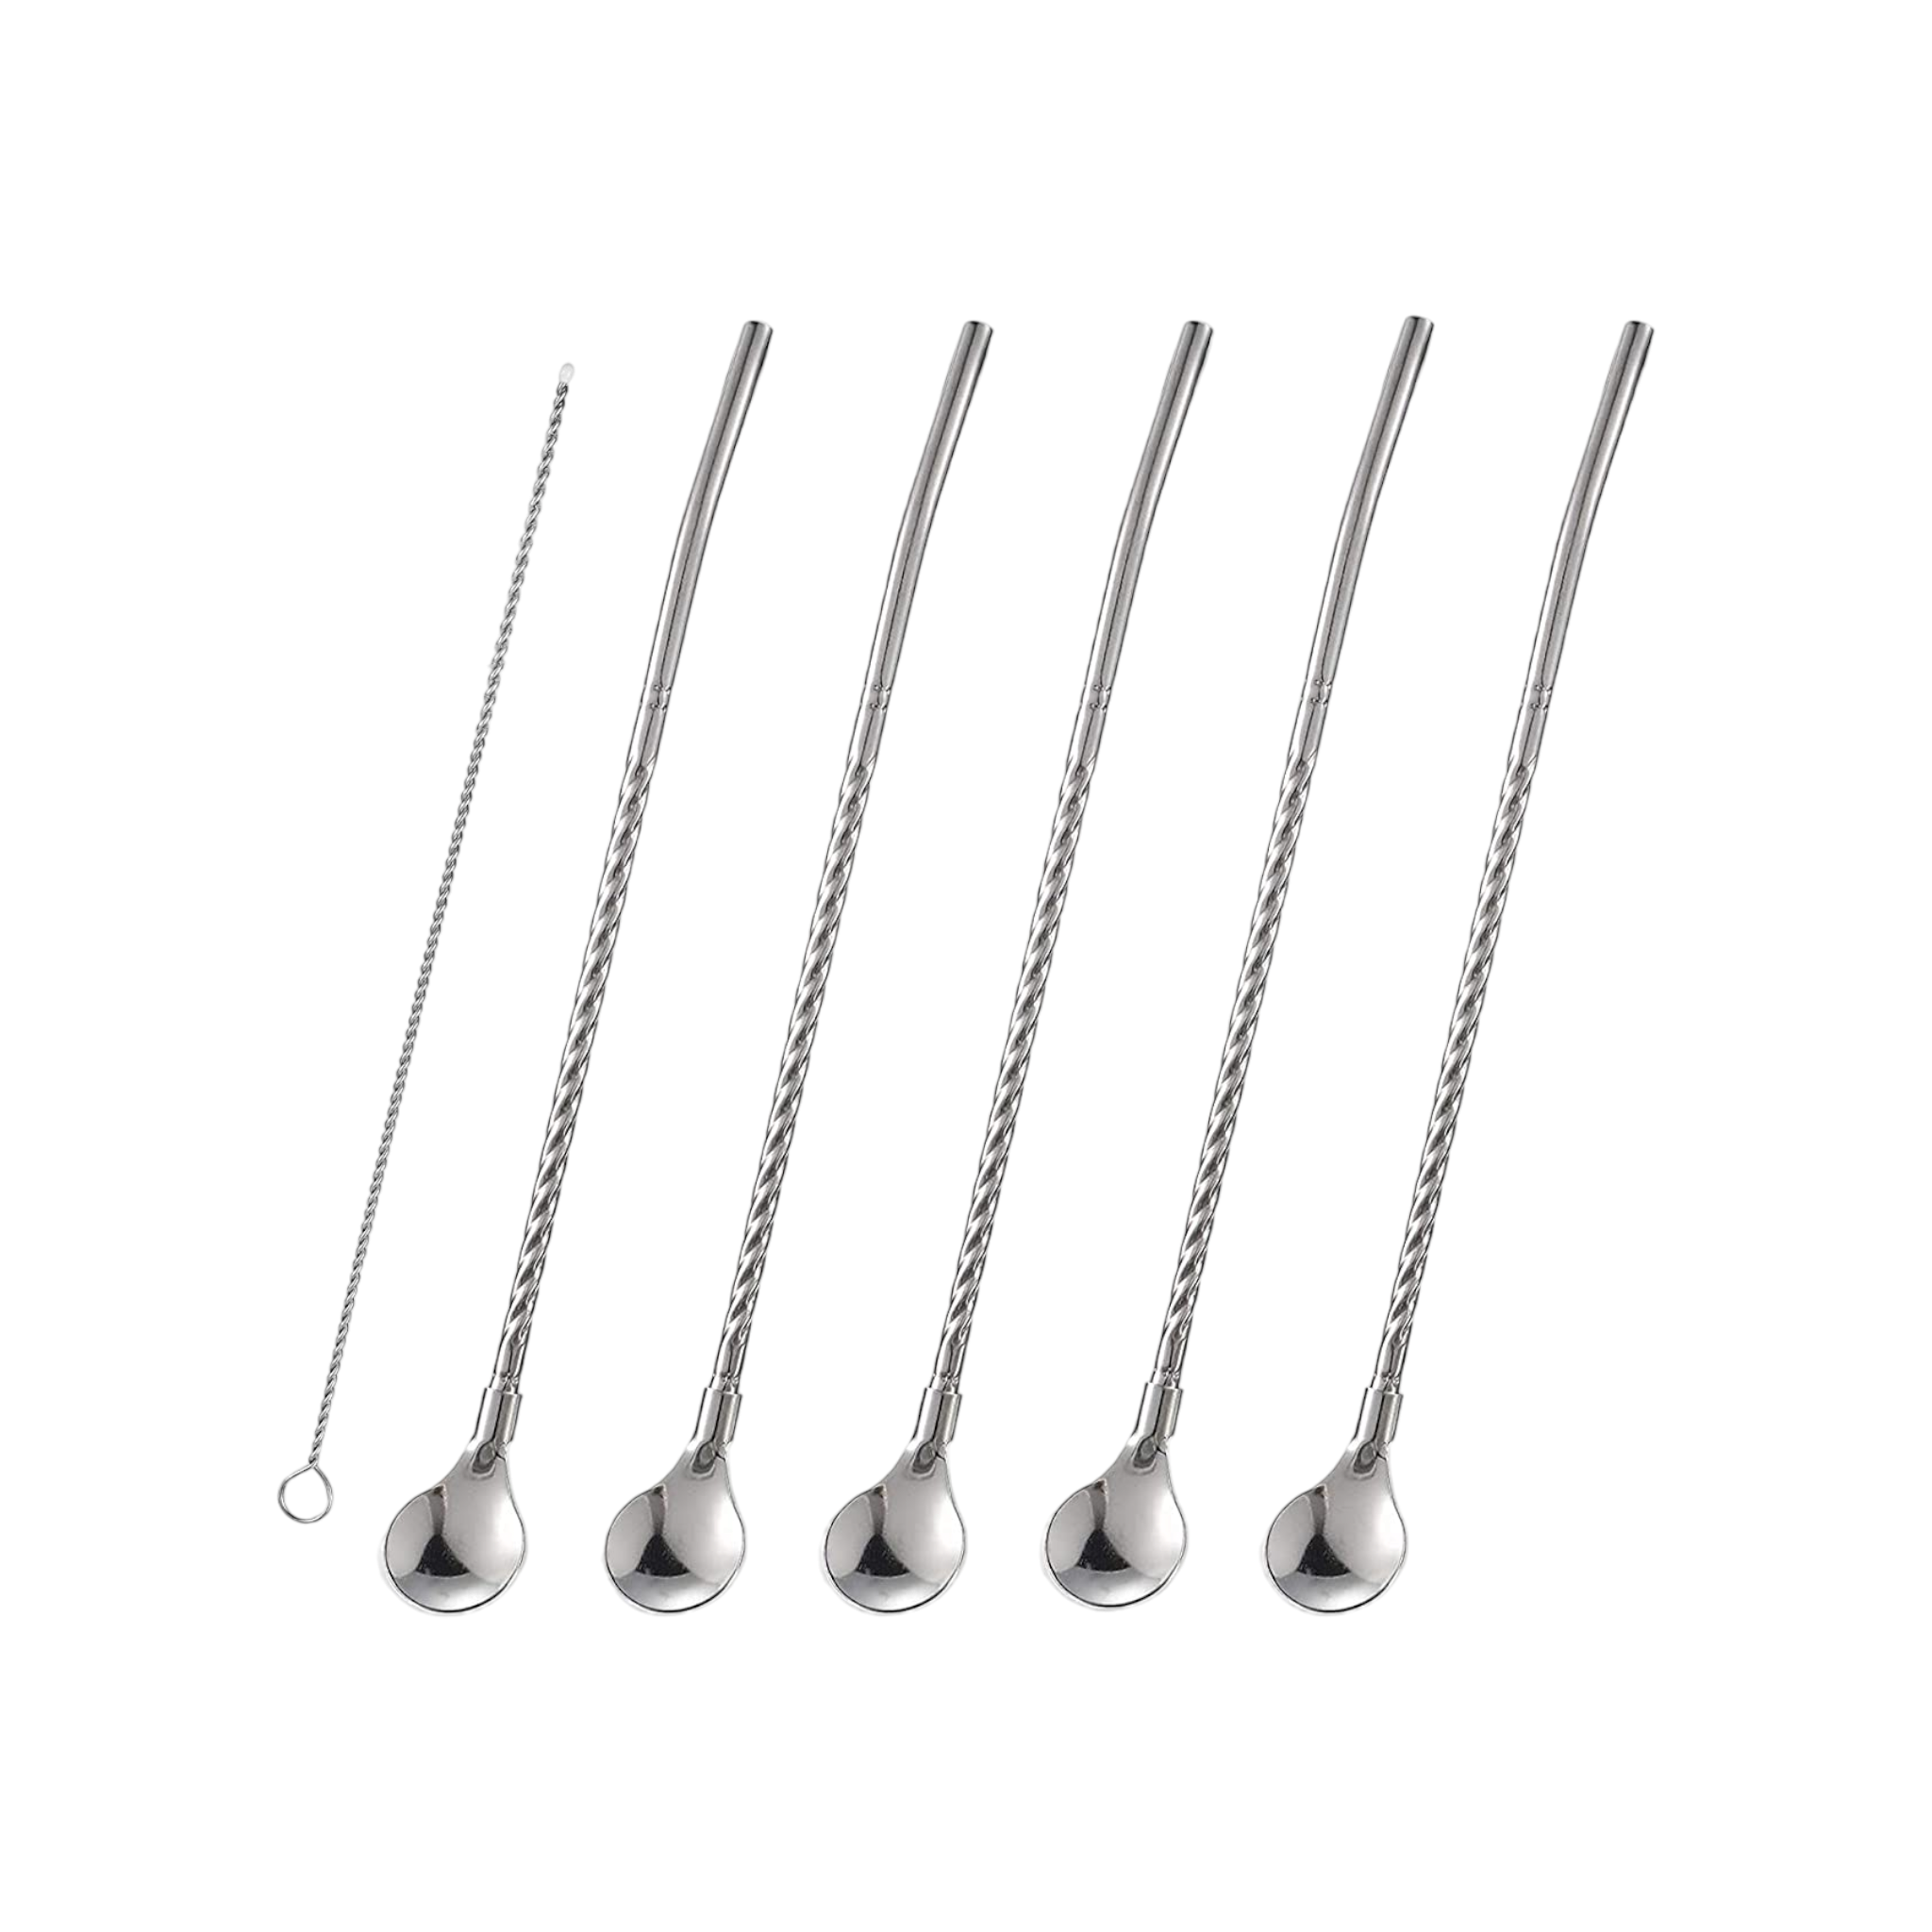 Spiral Soda Straw Spoons Stainless Steel with Brush 22.5cm 7pc Set